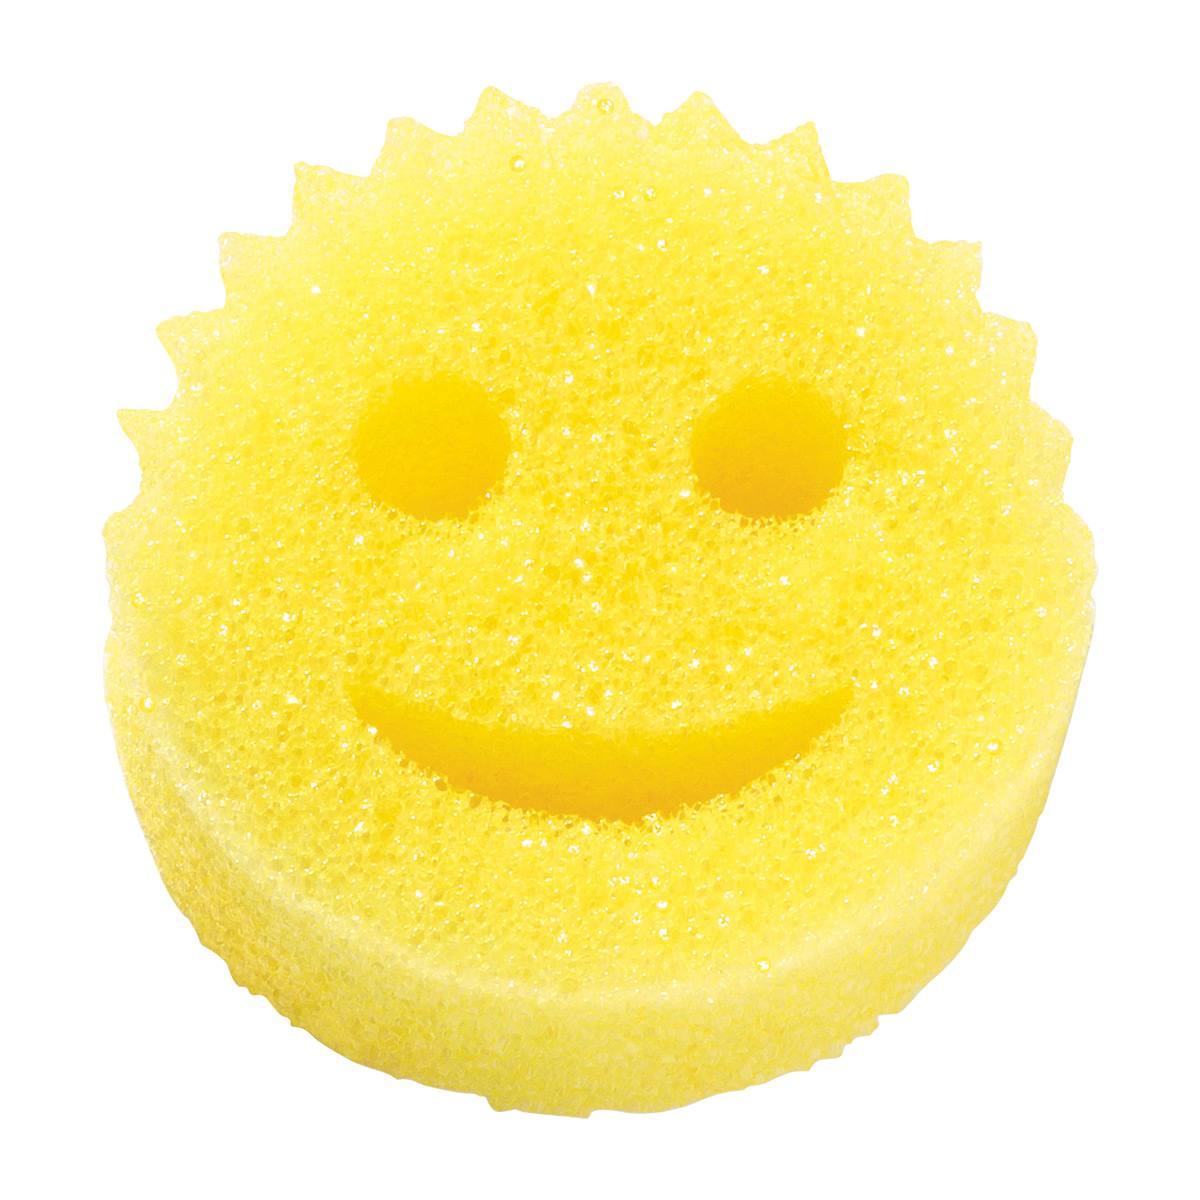 https://www.containerstore.com/catalogimages/303526/SS_16_ScrubDaddy_R081716_1200.jpg